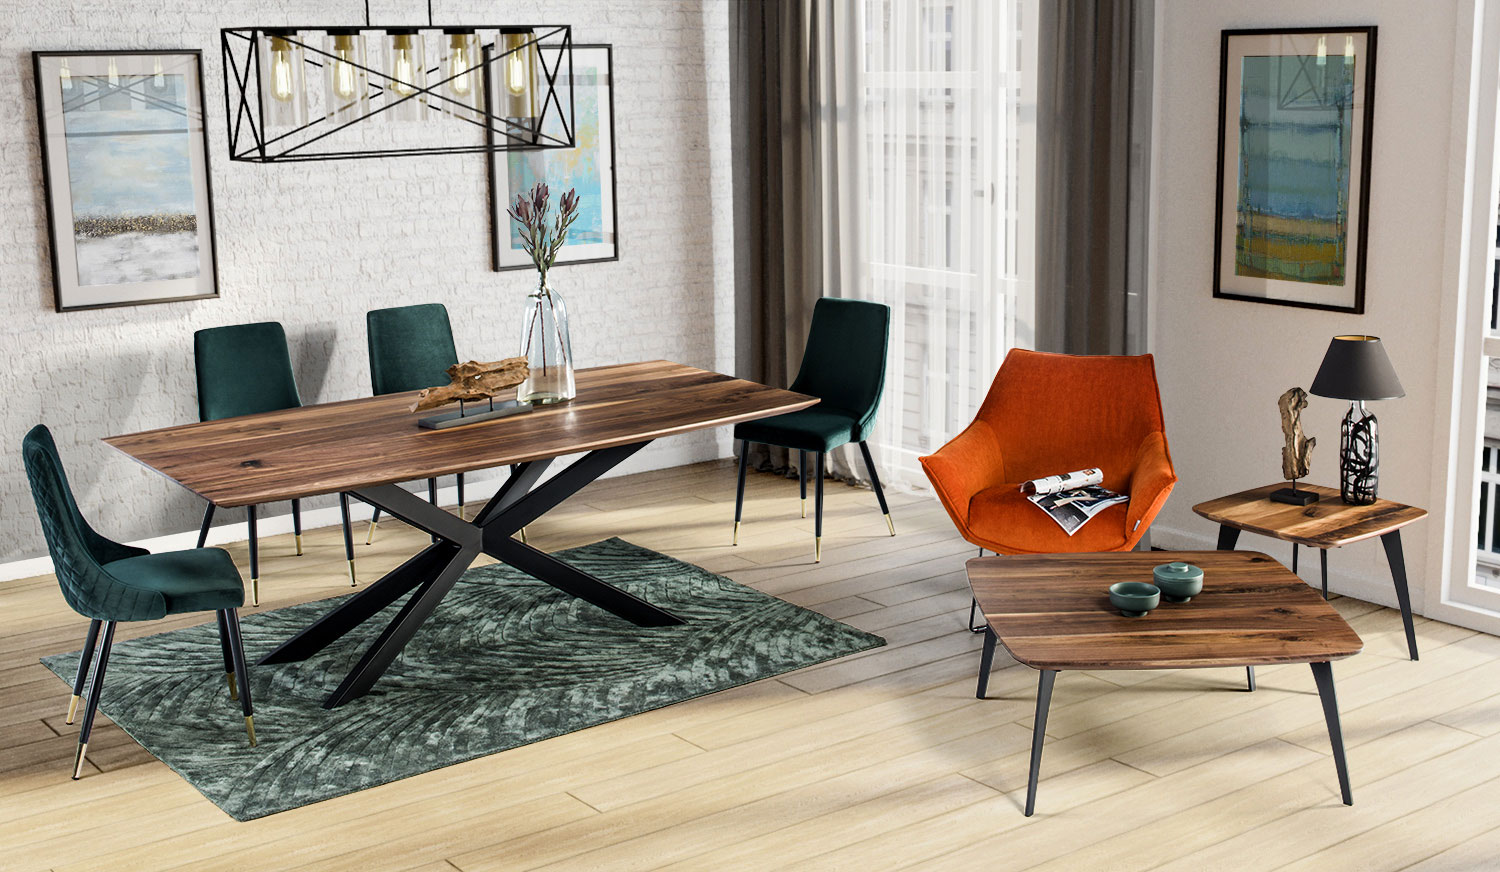 Bacari walnut wood collection | Remo Meble